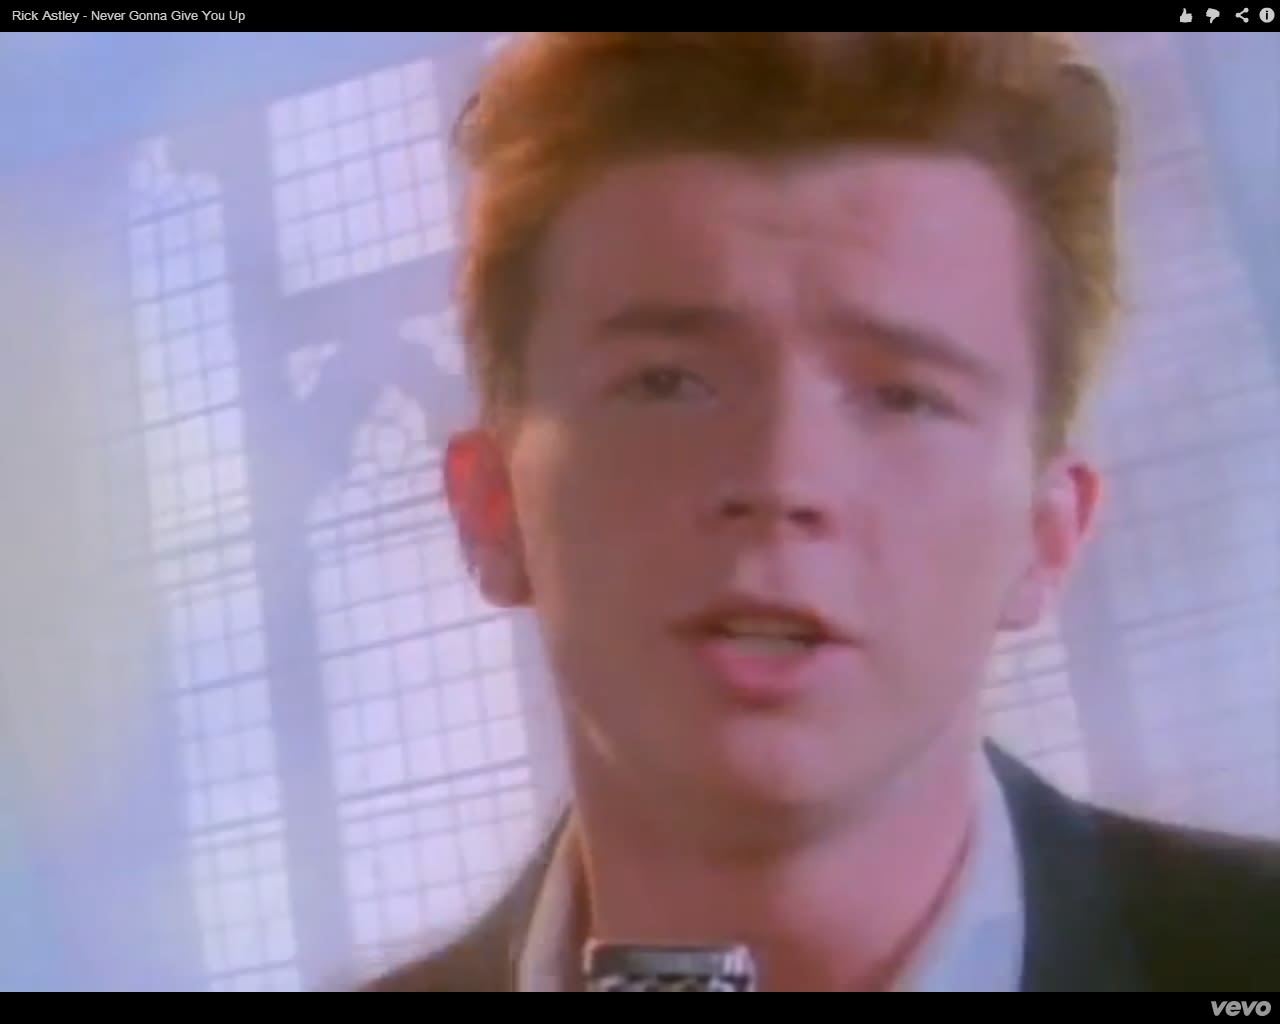 Original Rick Astley 'rickrolling' video removed from , The  Independent